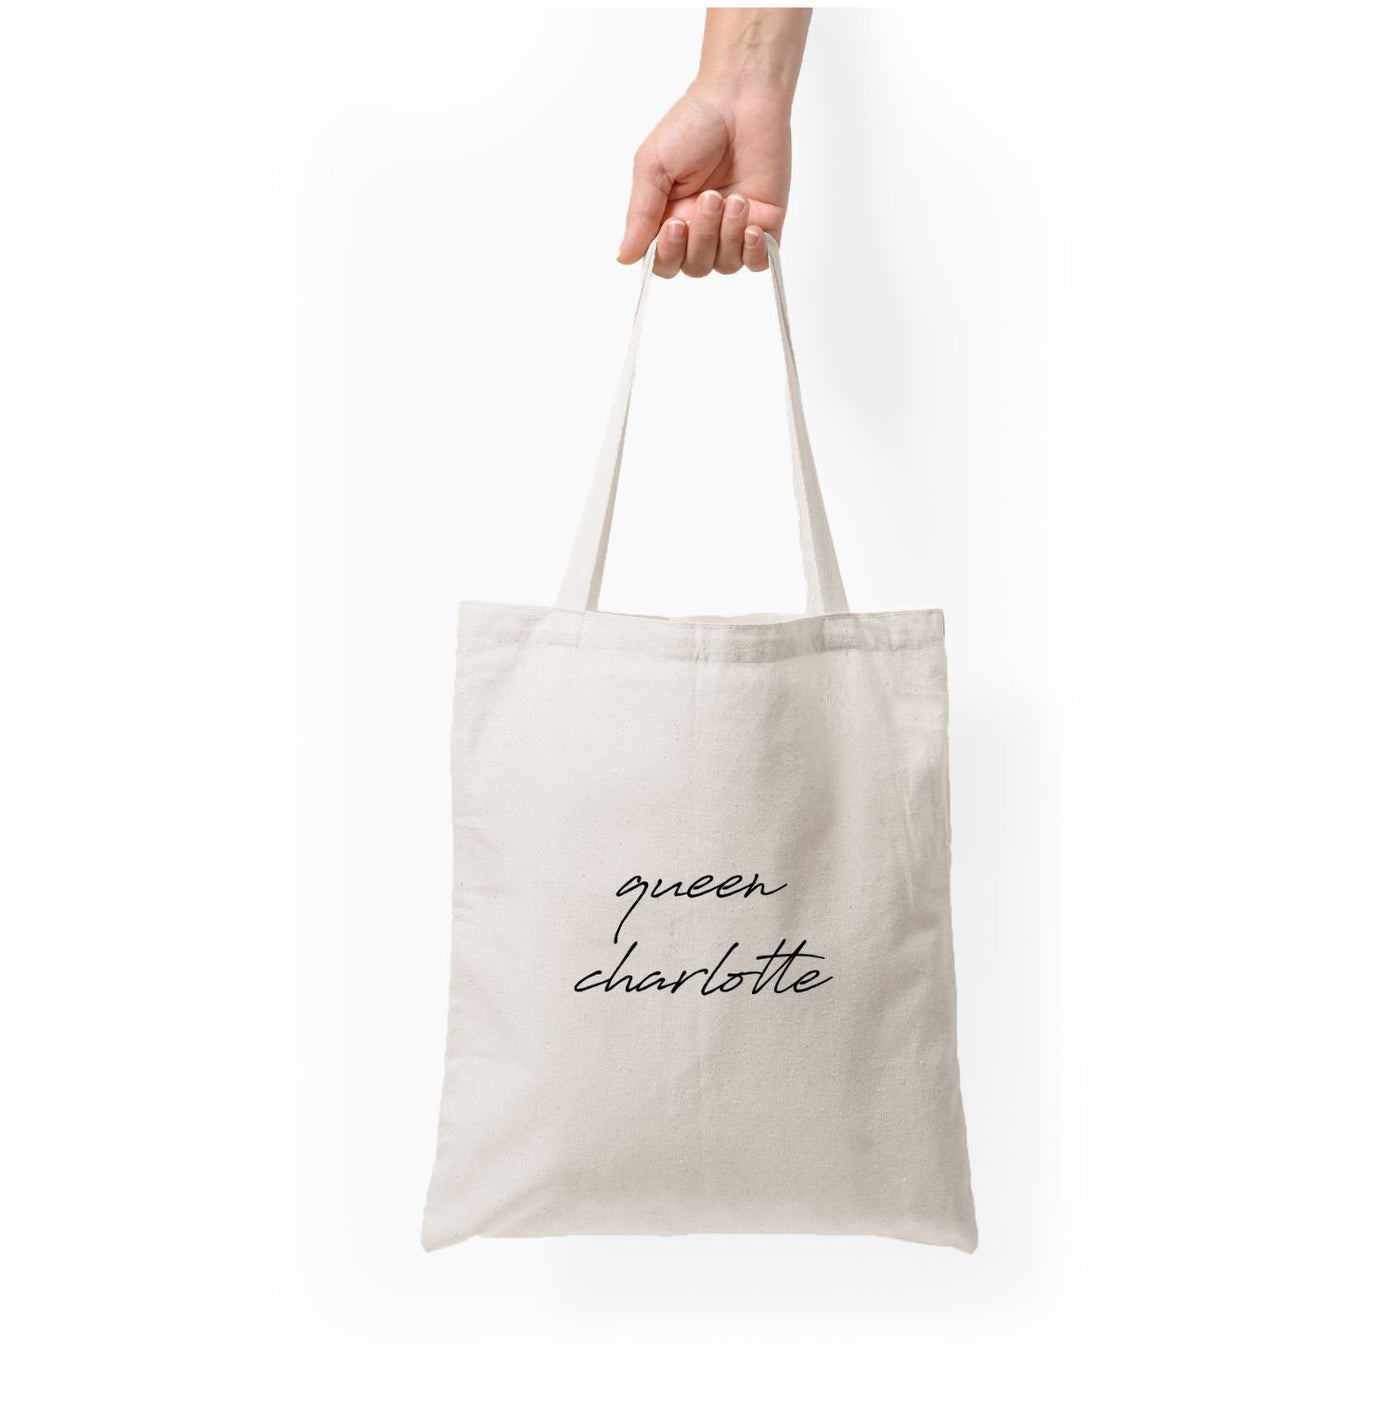 Announce - Queen Charlotte Tote Bag